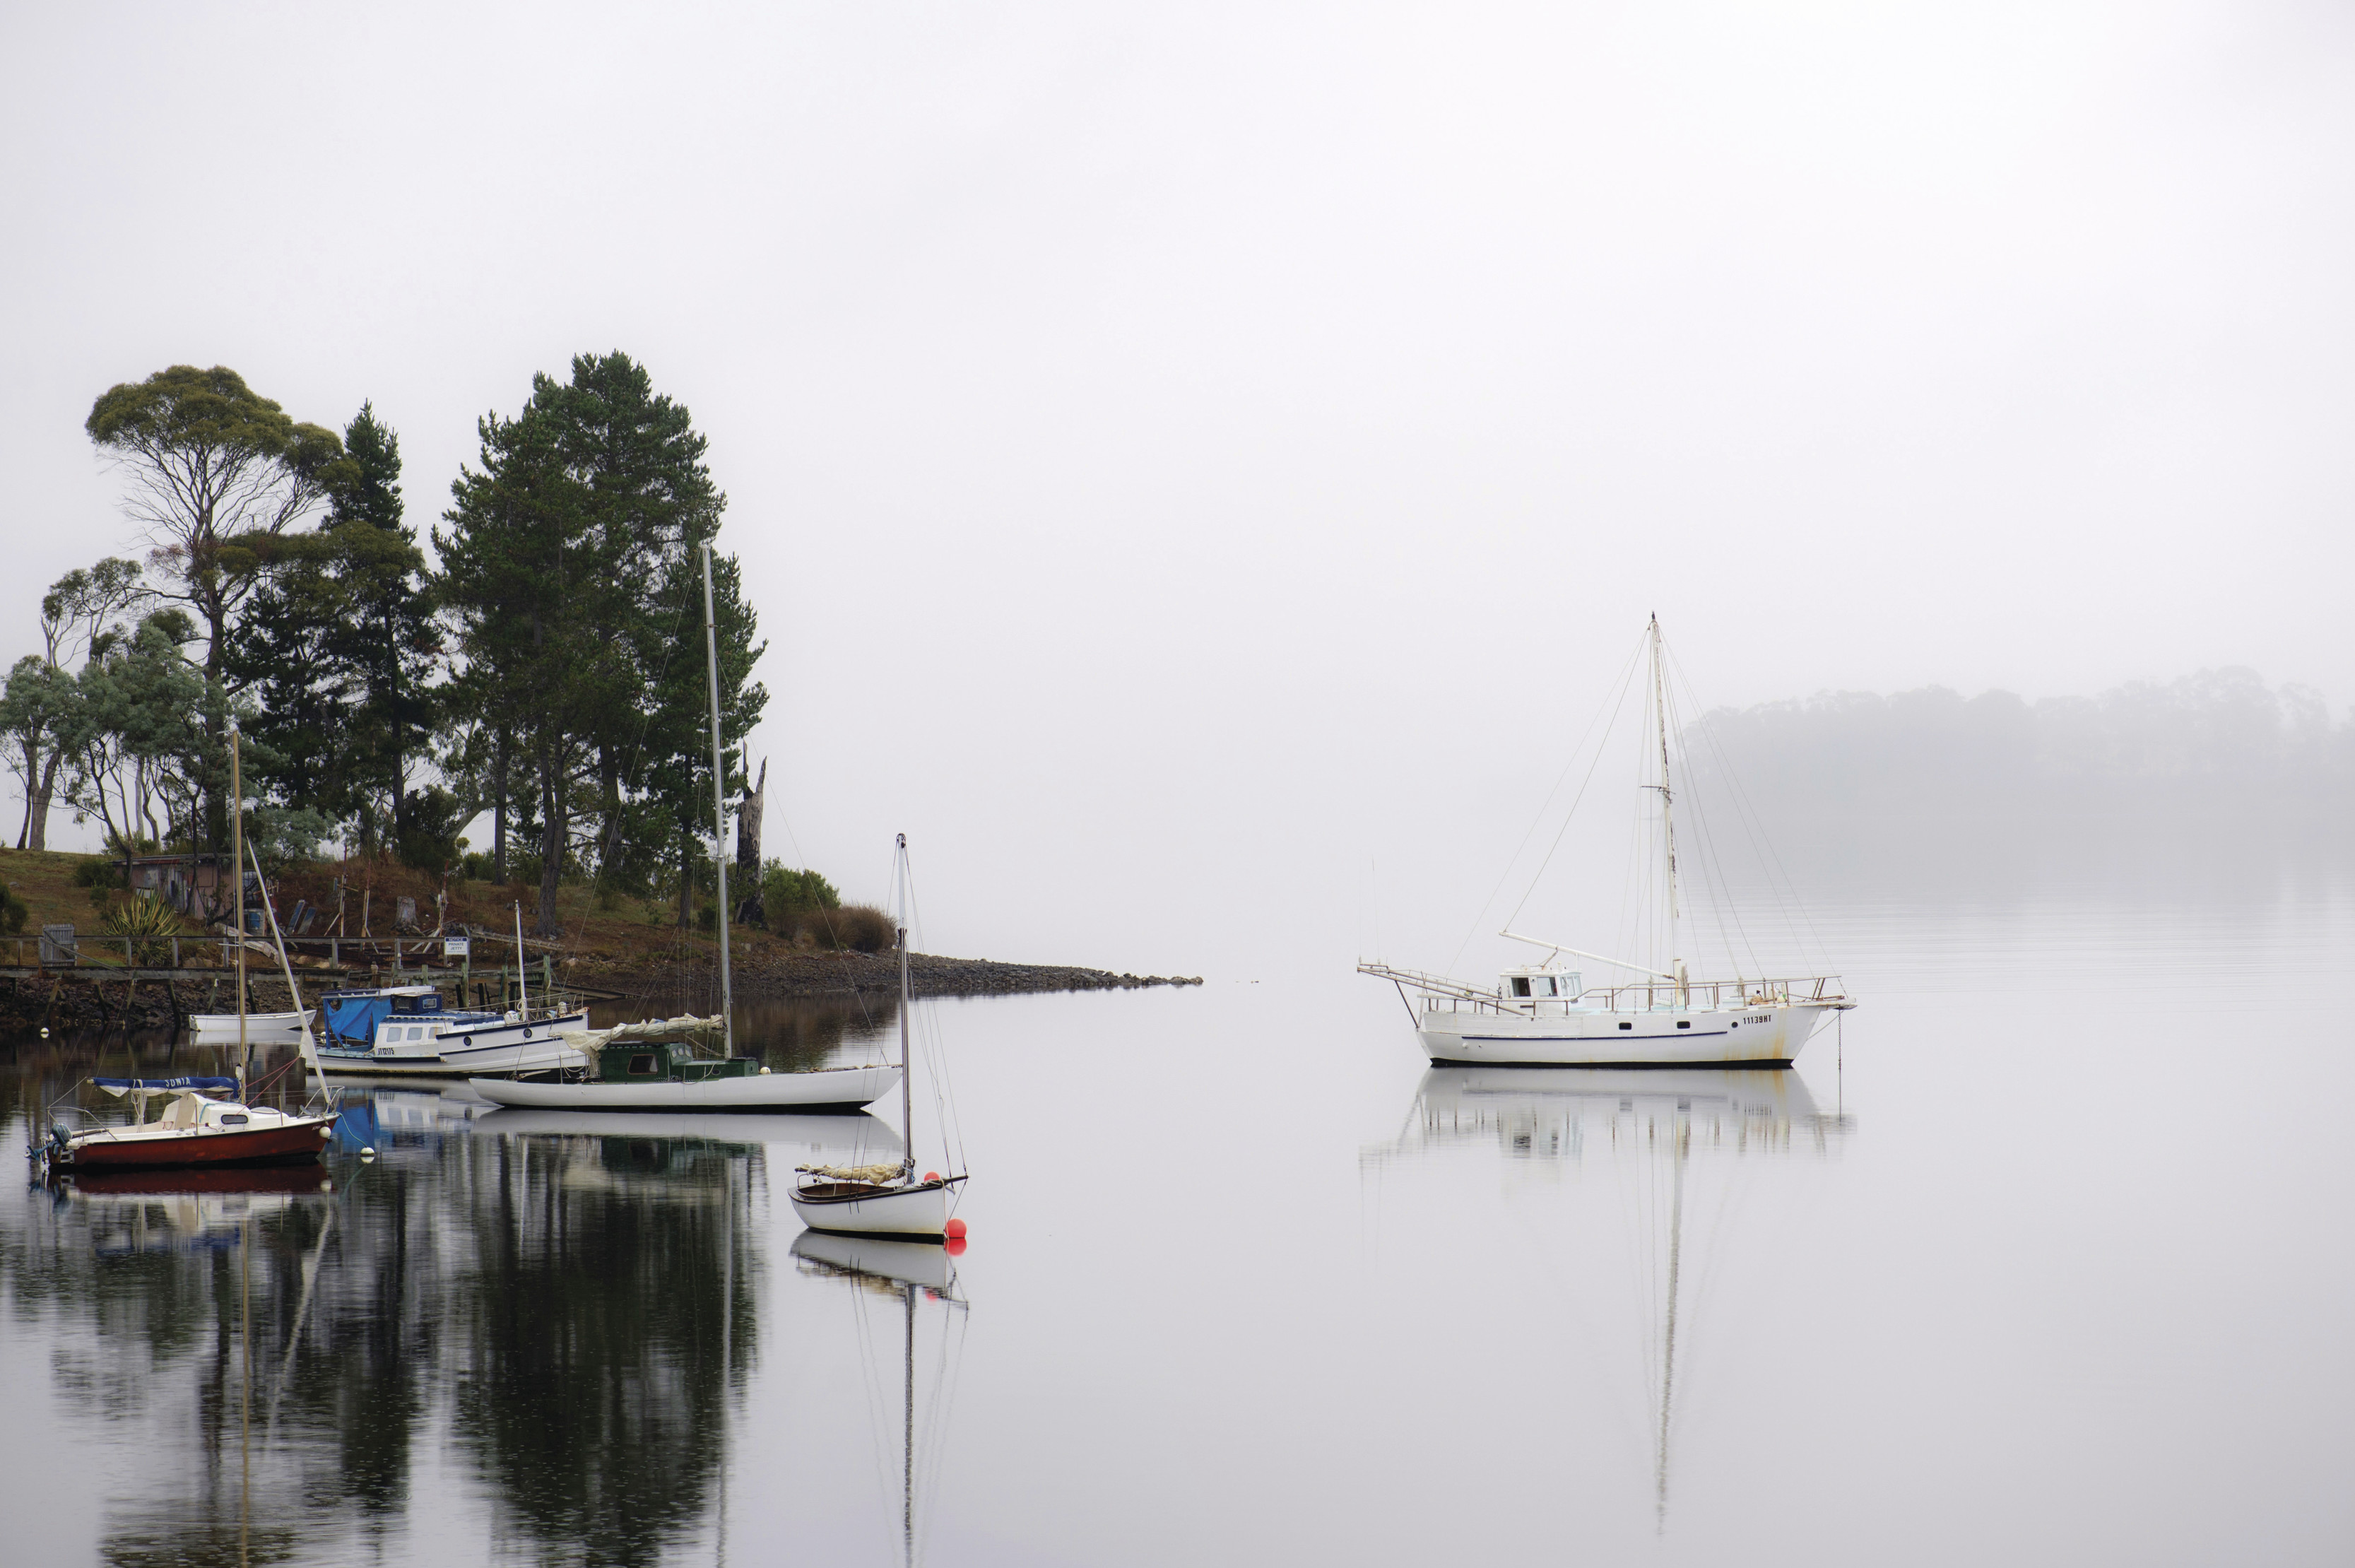 Boats on the misty Huon River. The sky blends into the water as it's covered by the mist.